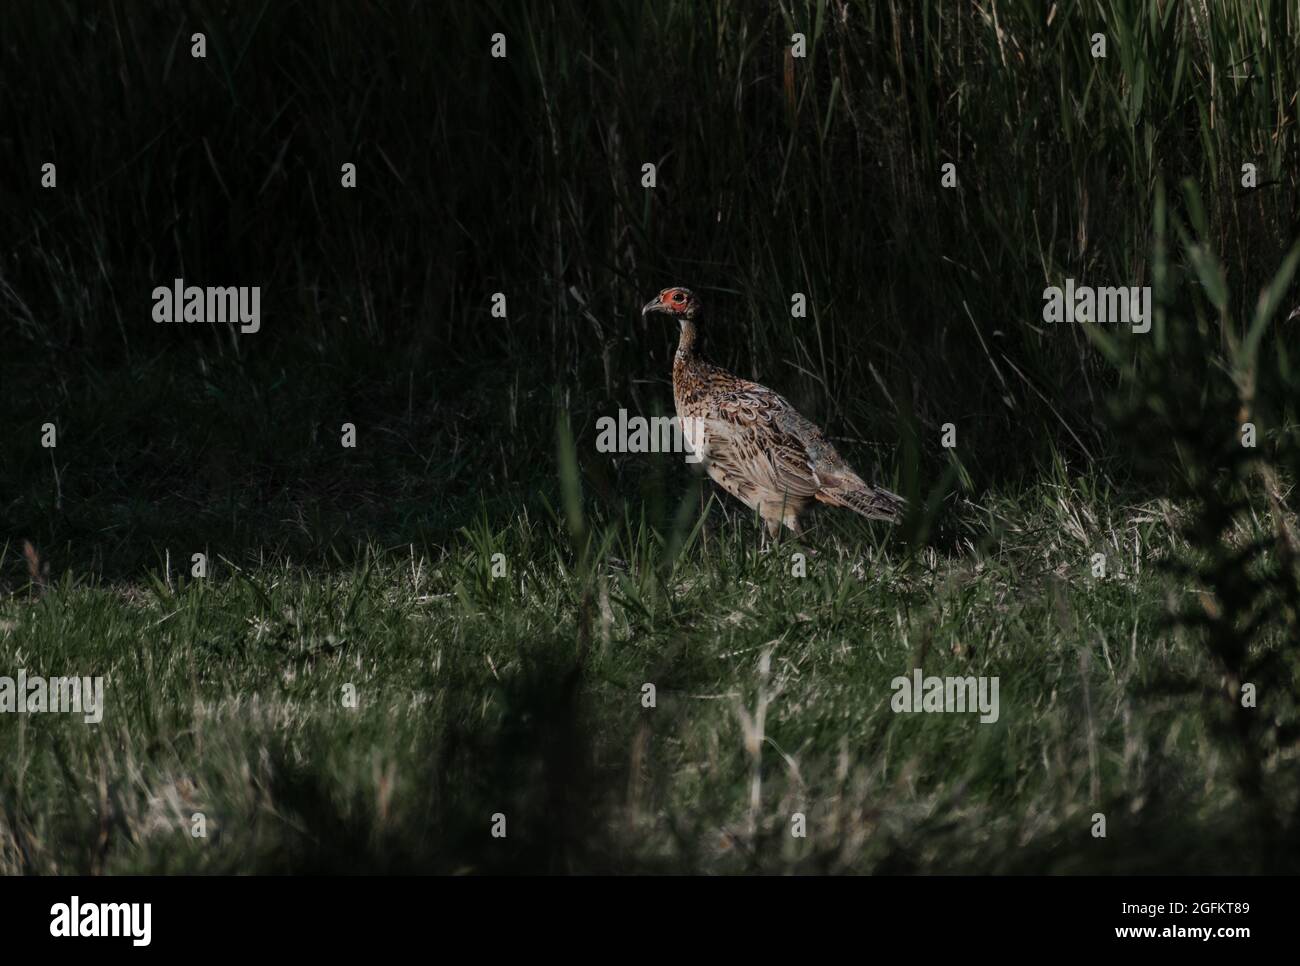 Juvenile Pheasant in a field Stock Photo